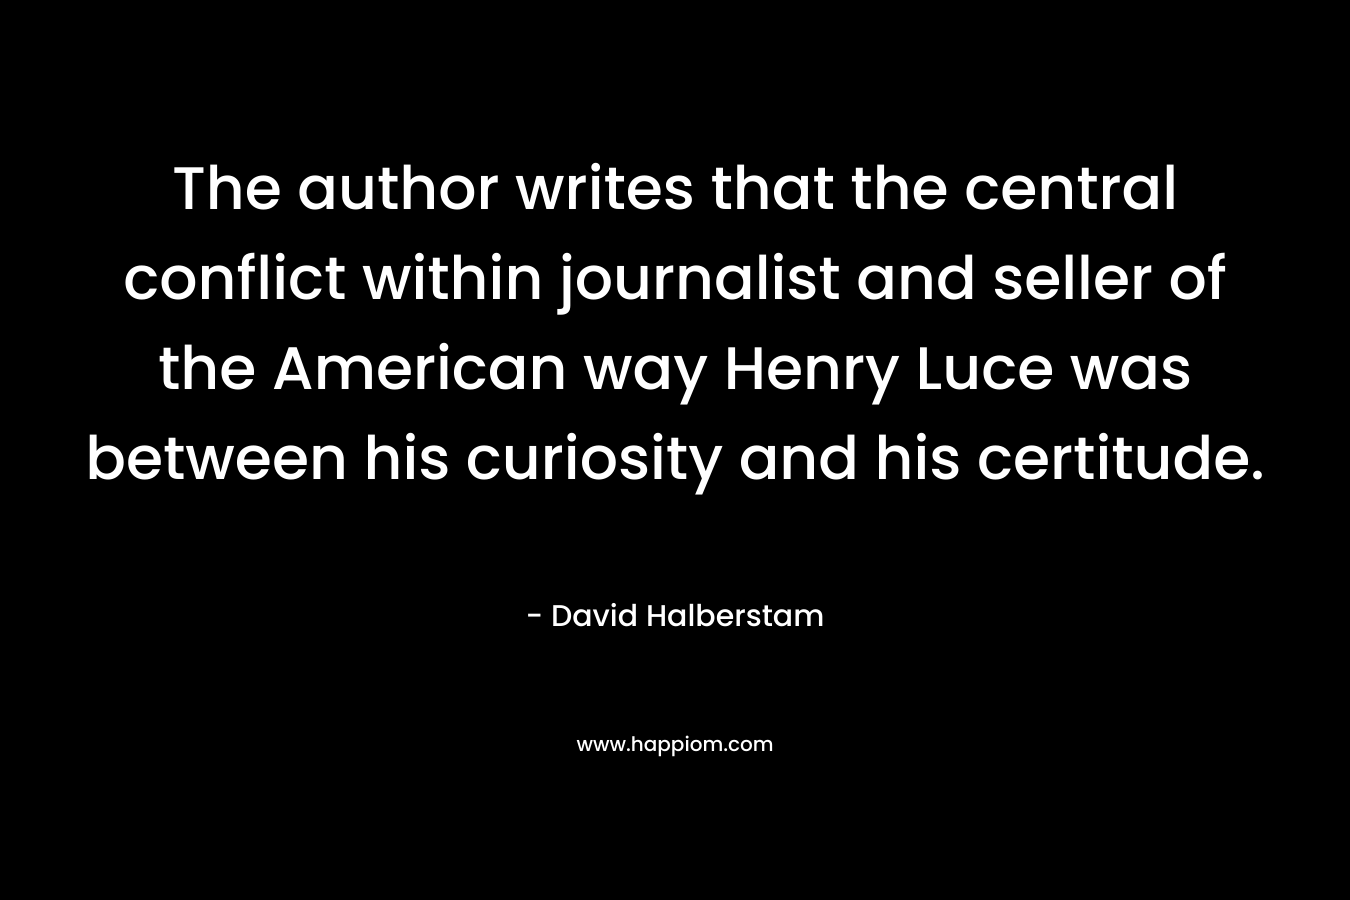 The author writes that the central conflict within journalist and seller of the American way Henry Luce was between his curiosity and his certitude. – David Halberstam